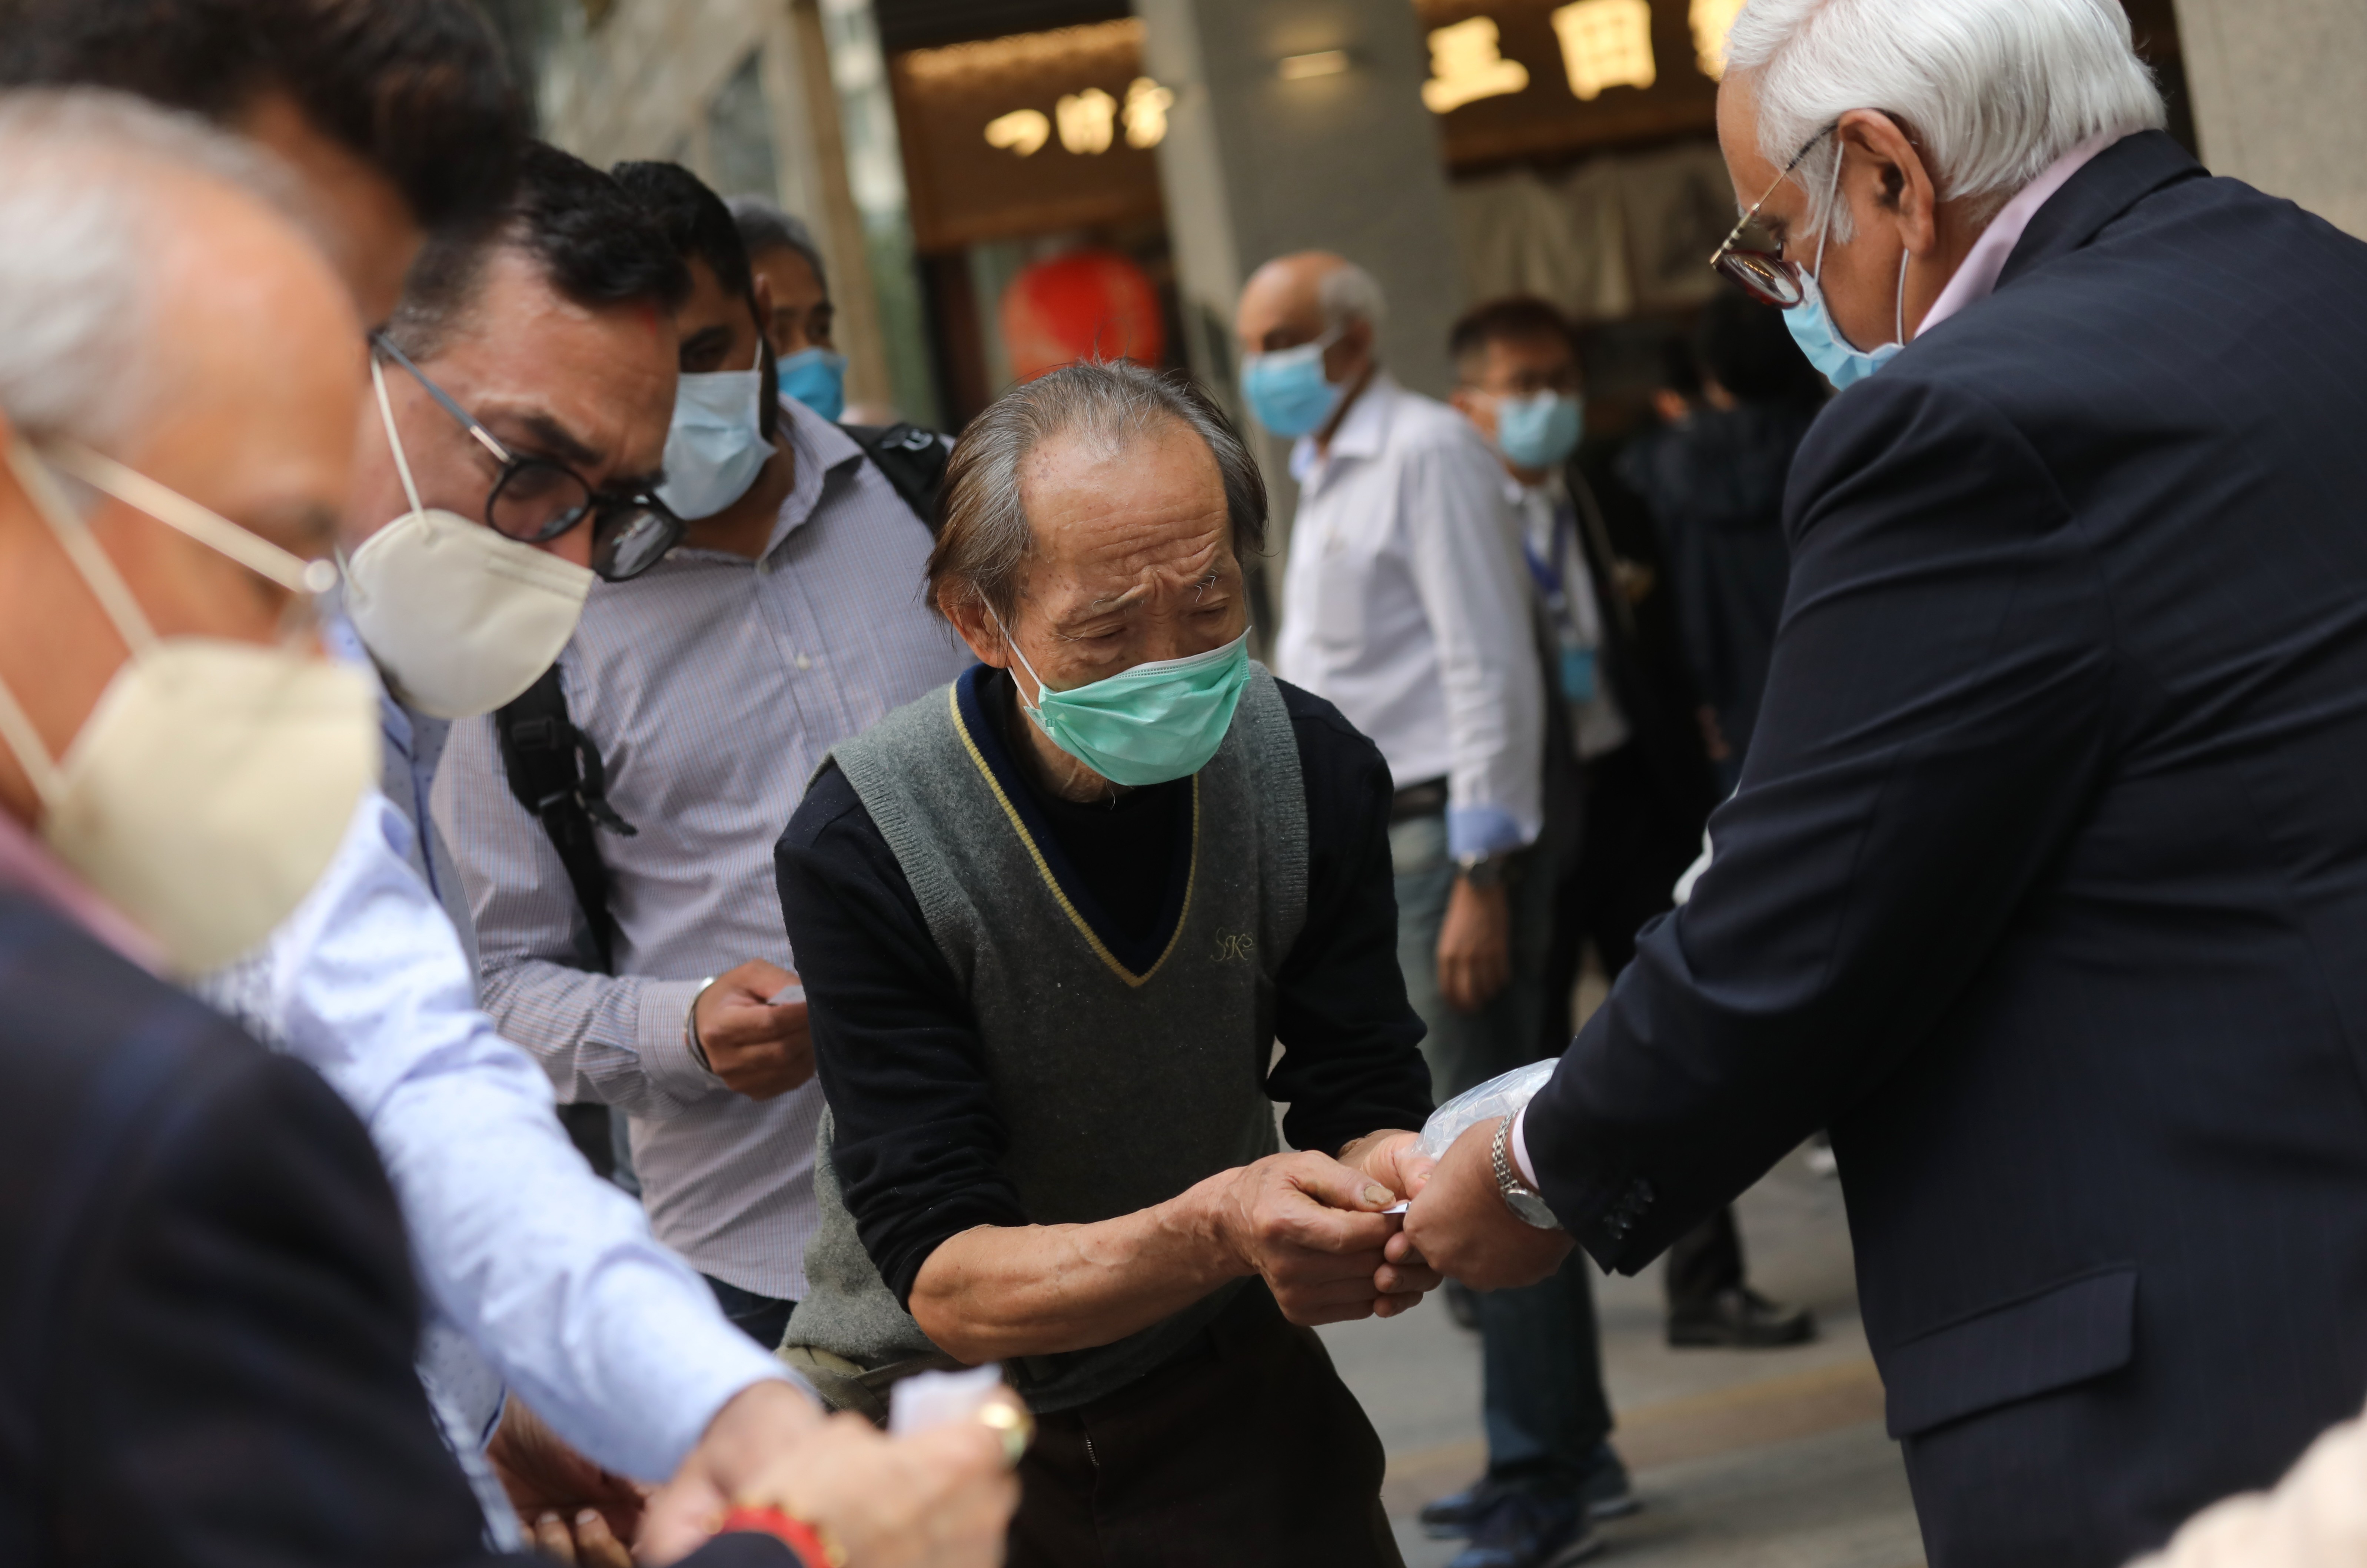 Members of a Hindu temple and non-profit organisation distribute free face masks and hand sanitiser to citizens over 60 in Tsim Sha Tsui on March 10. As the government scrambled to secure the supply of face masks, various groups used their own means to source and distribute them. Photo: K.Y. Cheng